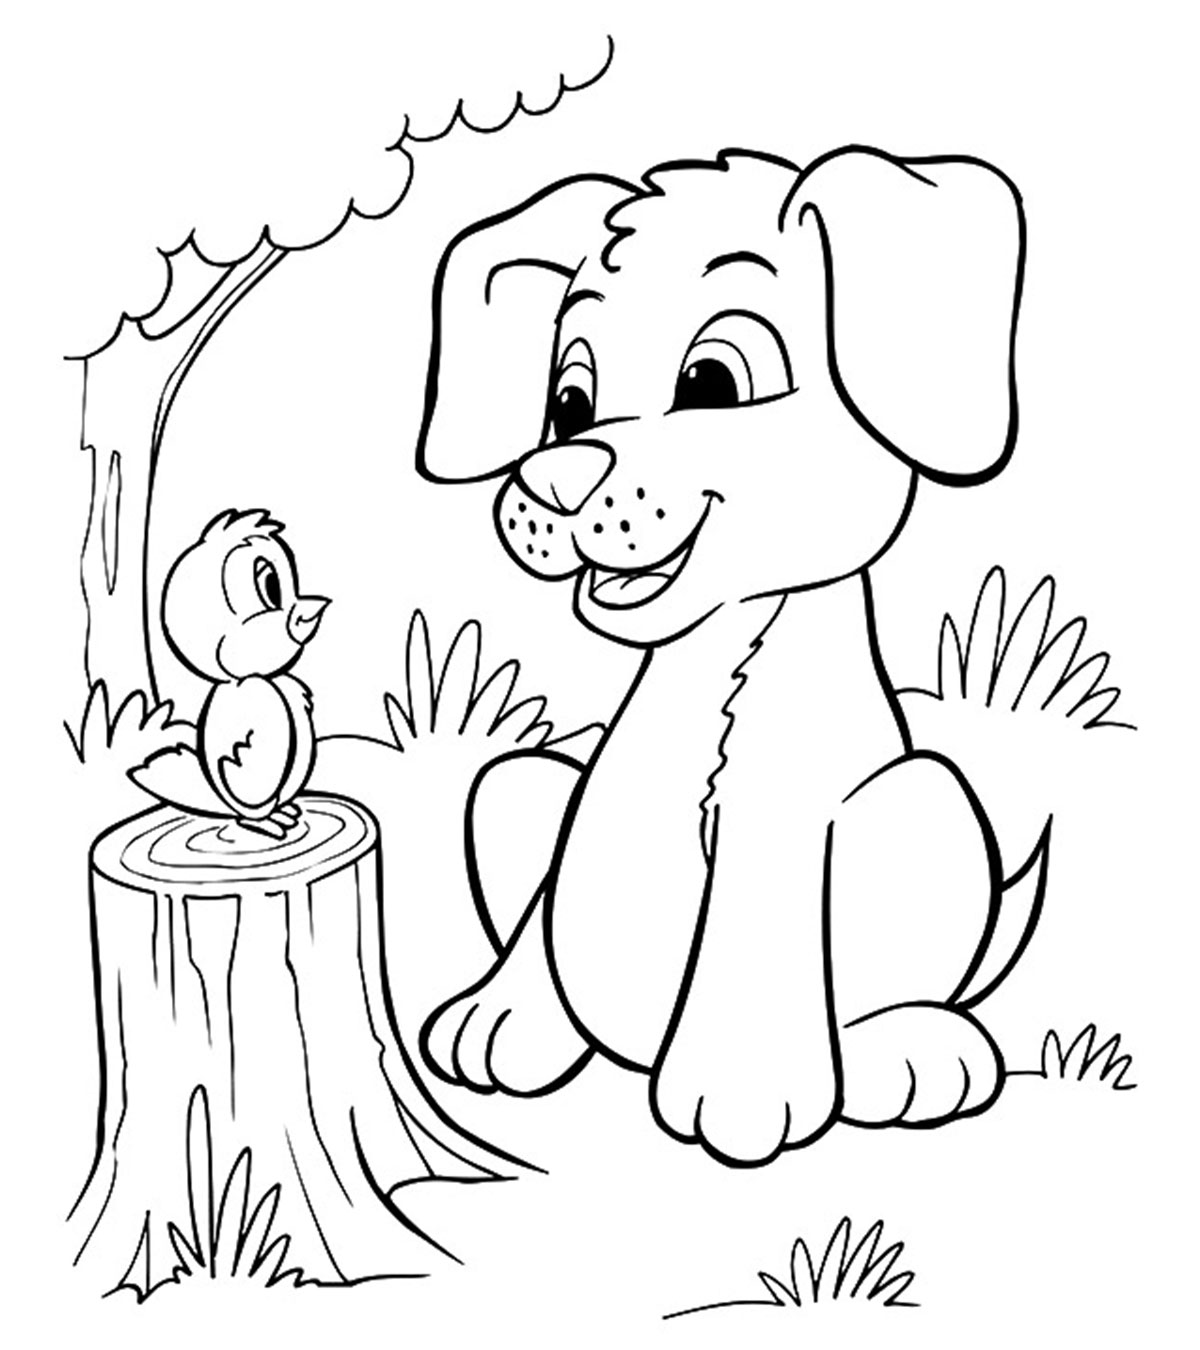 dog coloring page free printable dog coloring pages for kids dog coloring page 1 1